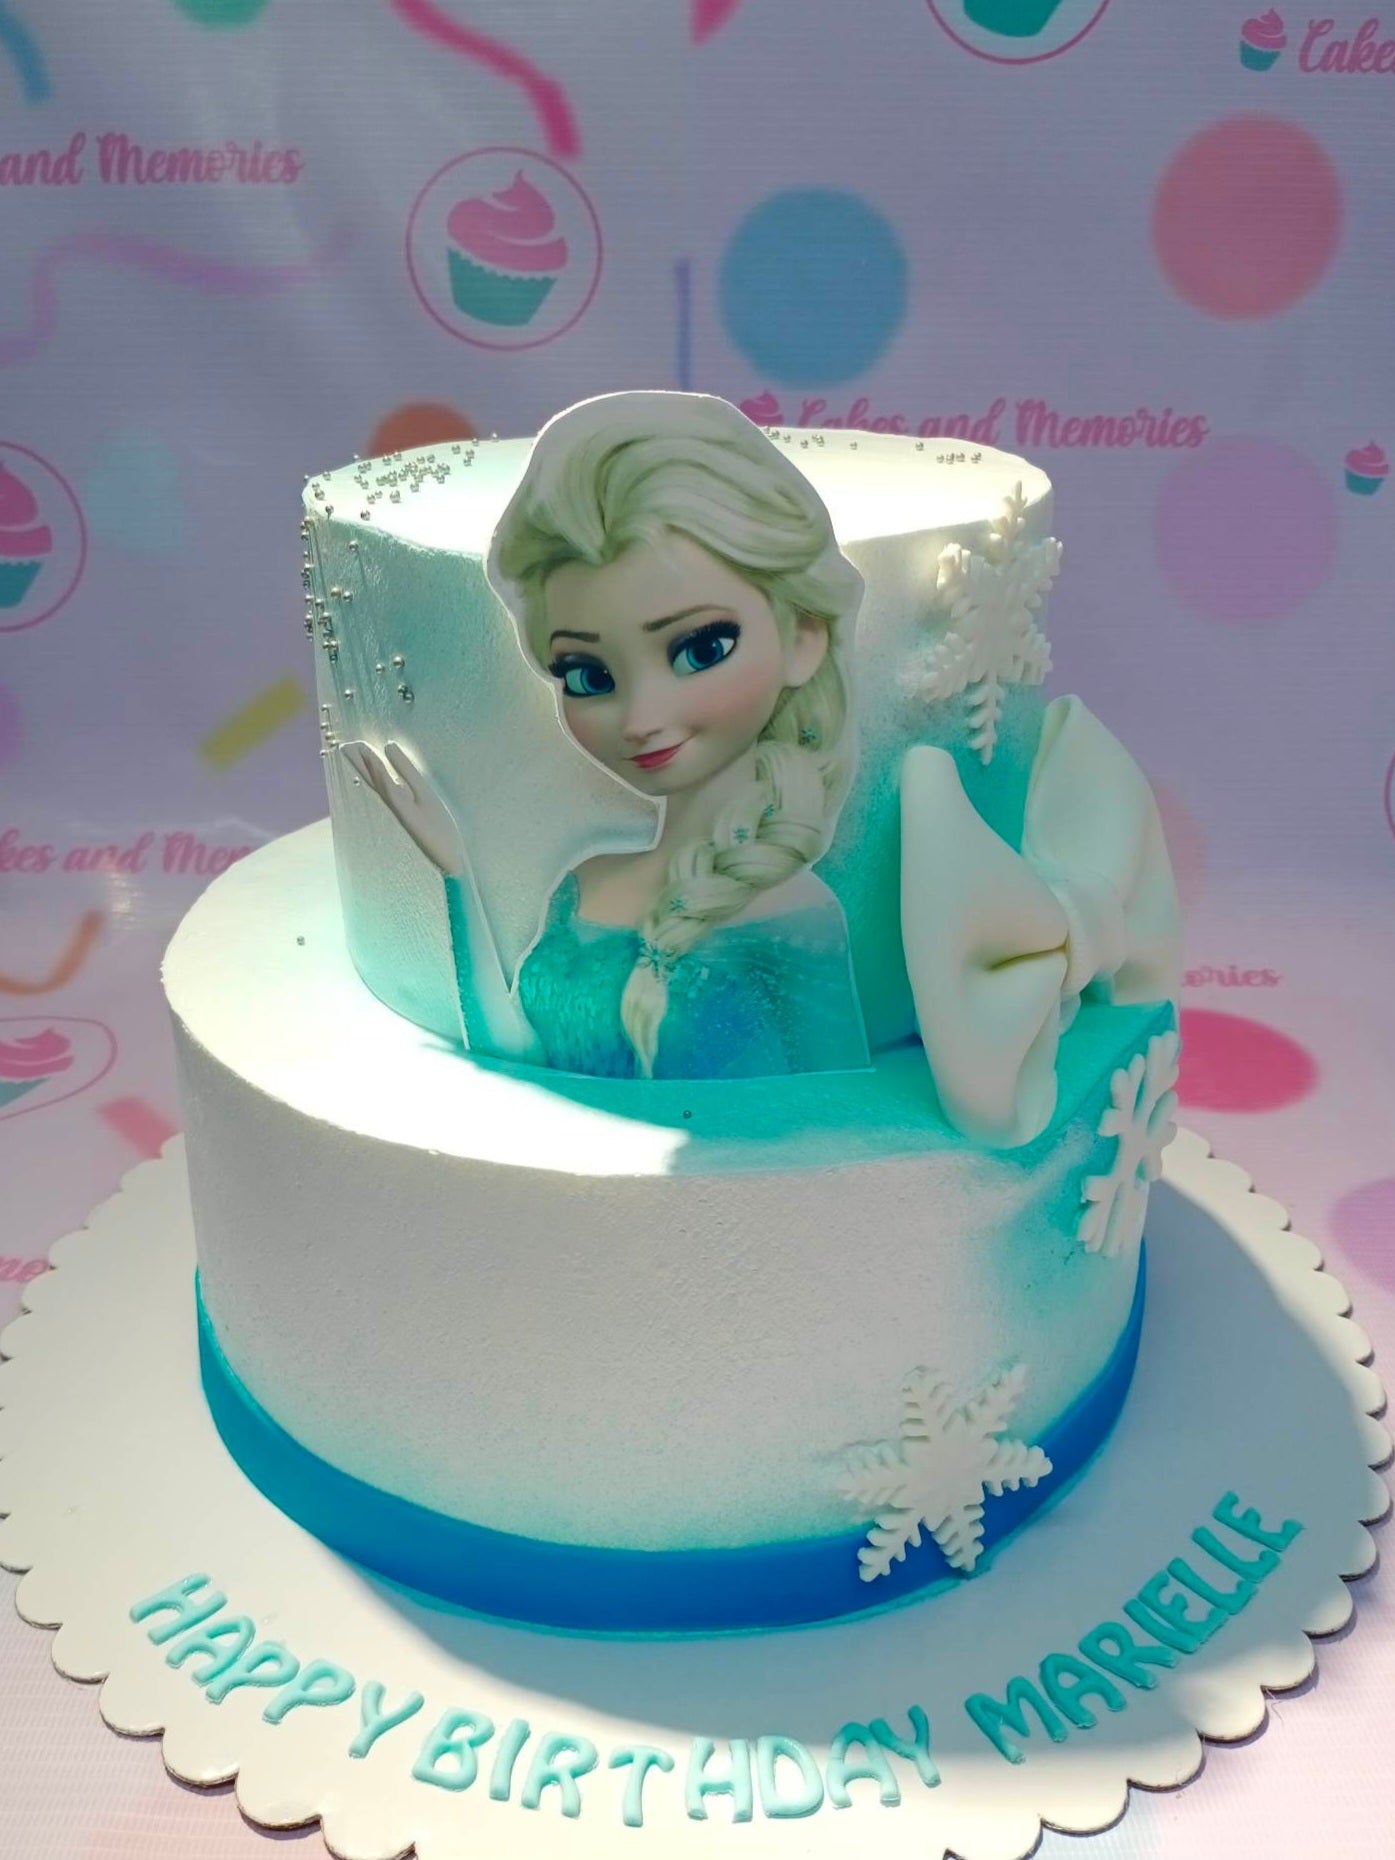 This beautiful custom decorated cake is perfect for any Frozen themed birthday party. It has a white base and is adorned with blue snowflakes and images of Elsa, Anna and Olaf. The quality of the decorations is unbeatable, making it the perfect choice for kids and Disney princess fans.